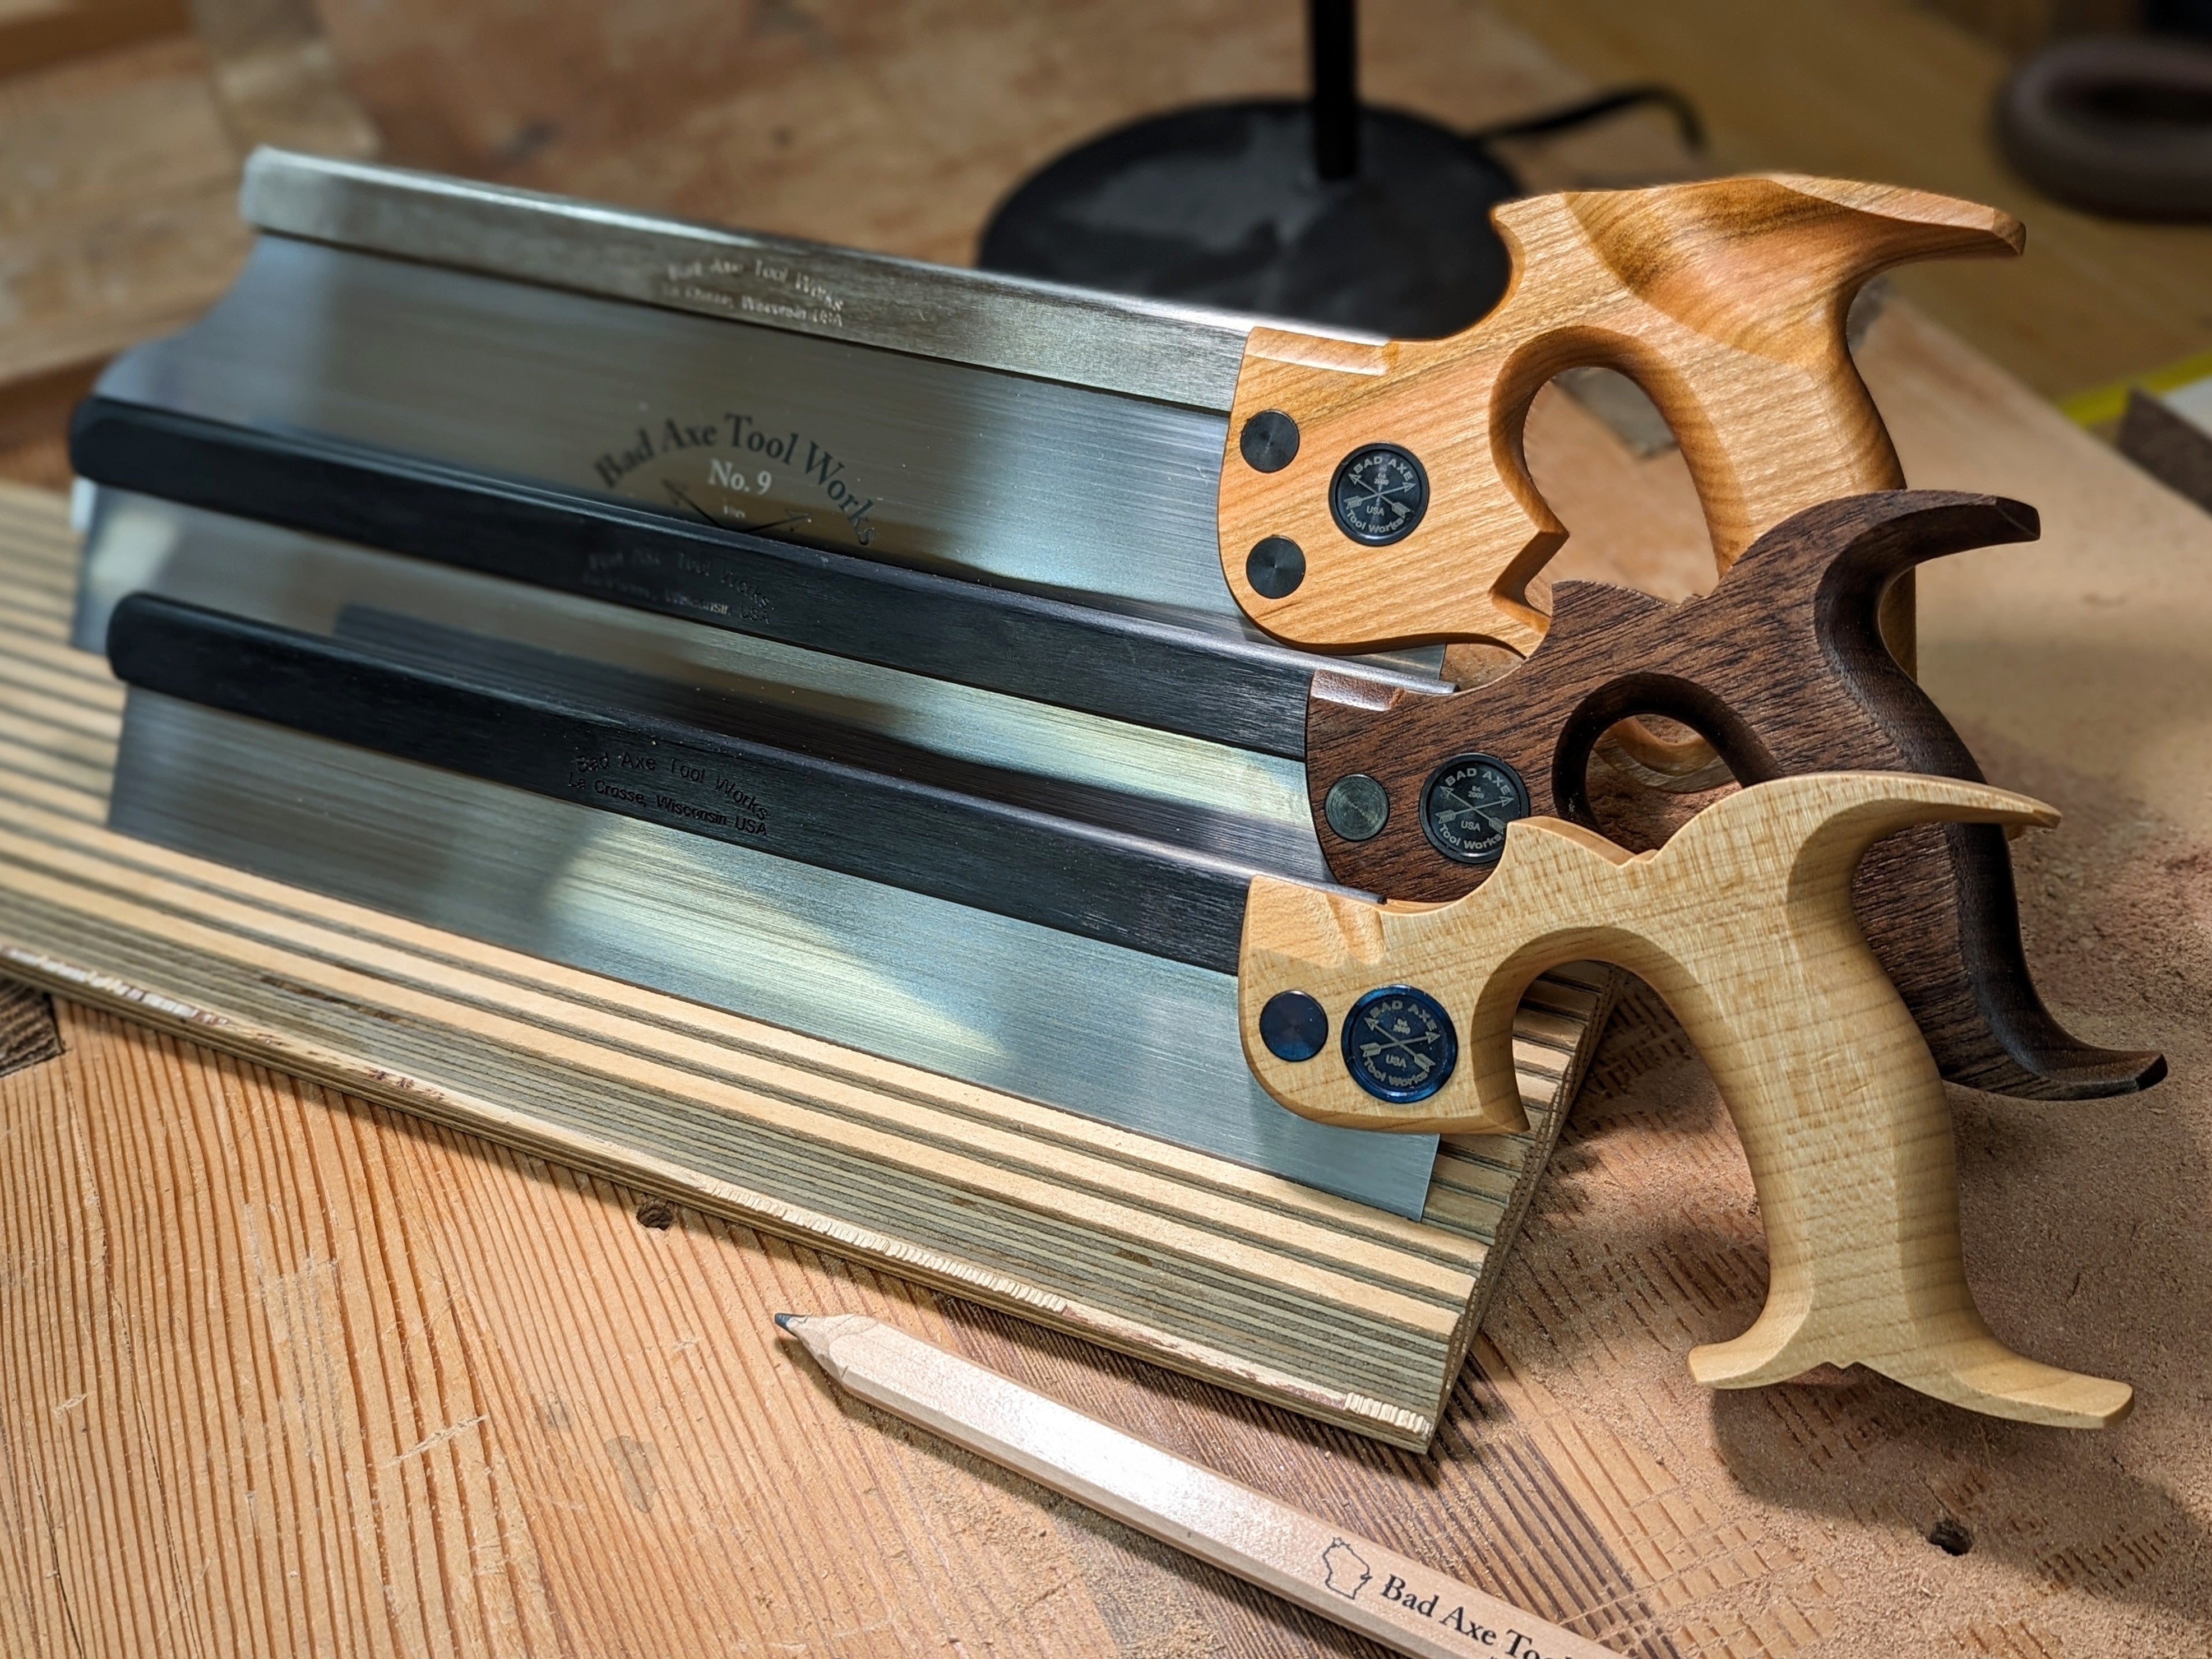 Customize your Saw